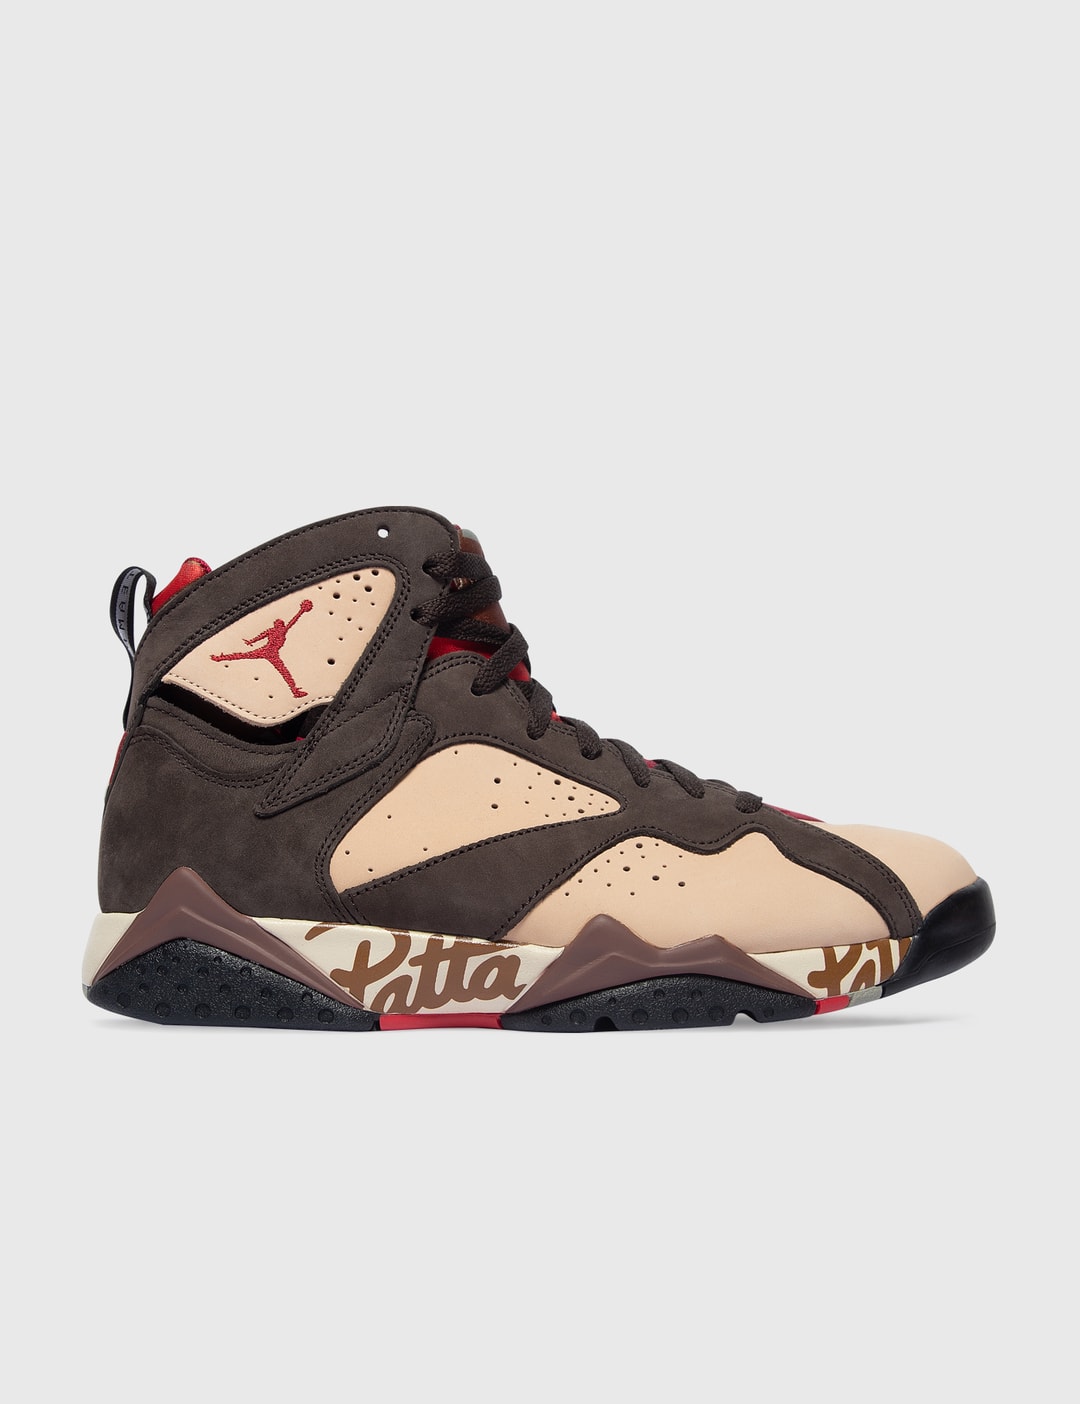 compensar Permanece Consejos Jordan Brand - Patta x Air Jordan 7 Retro OG SP 'Shimmer' | HBX - Globally  Curated Fashion and Lifestyle by Hypebeast